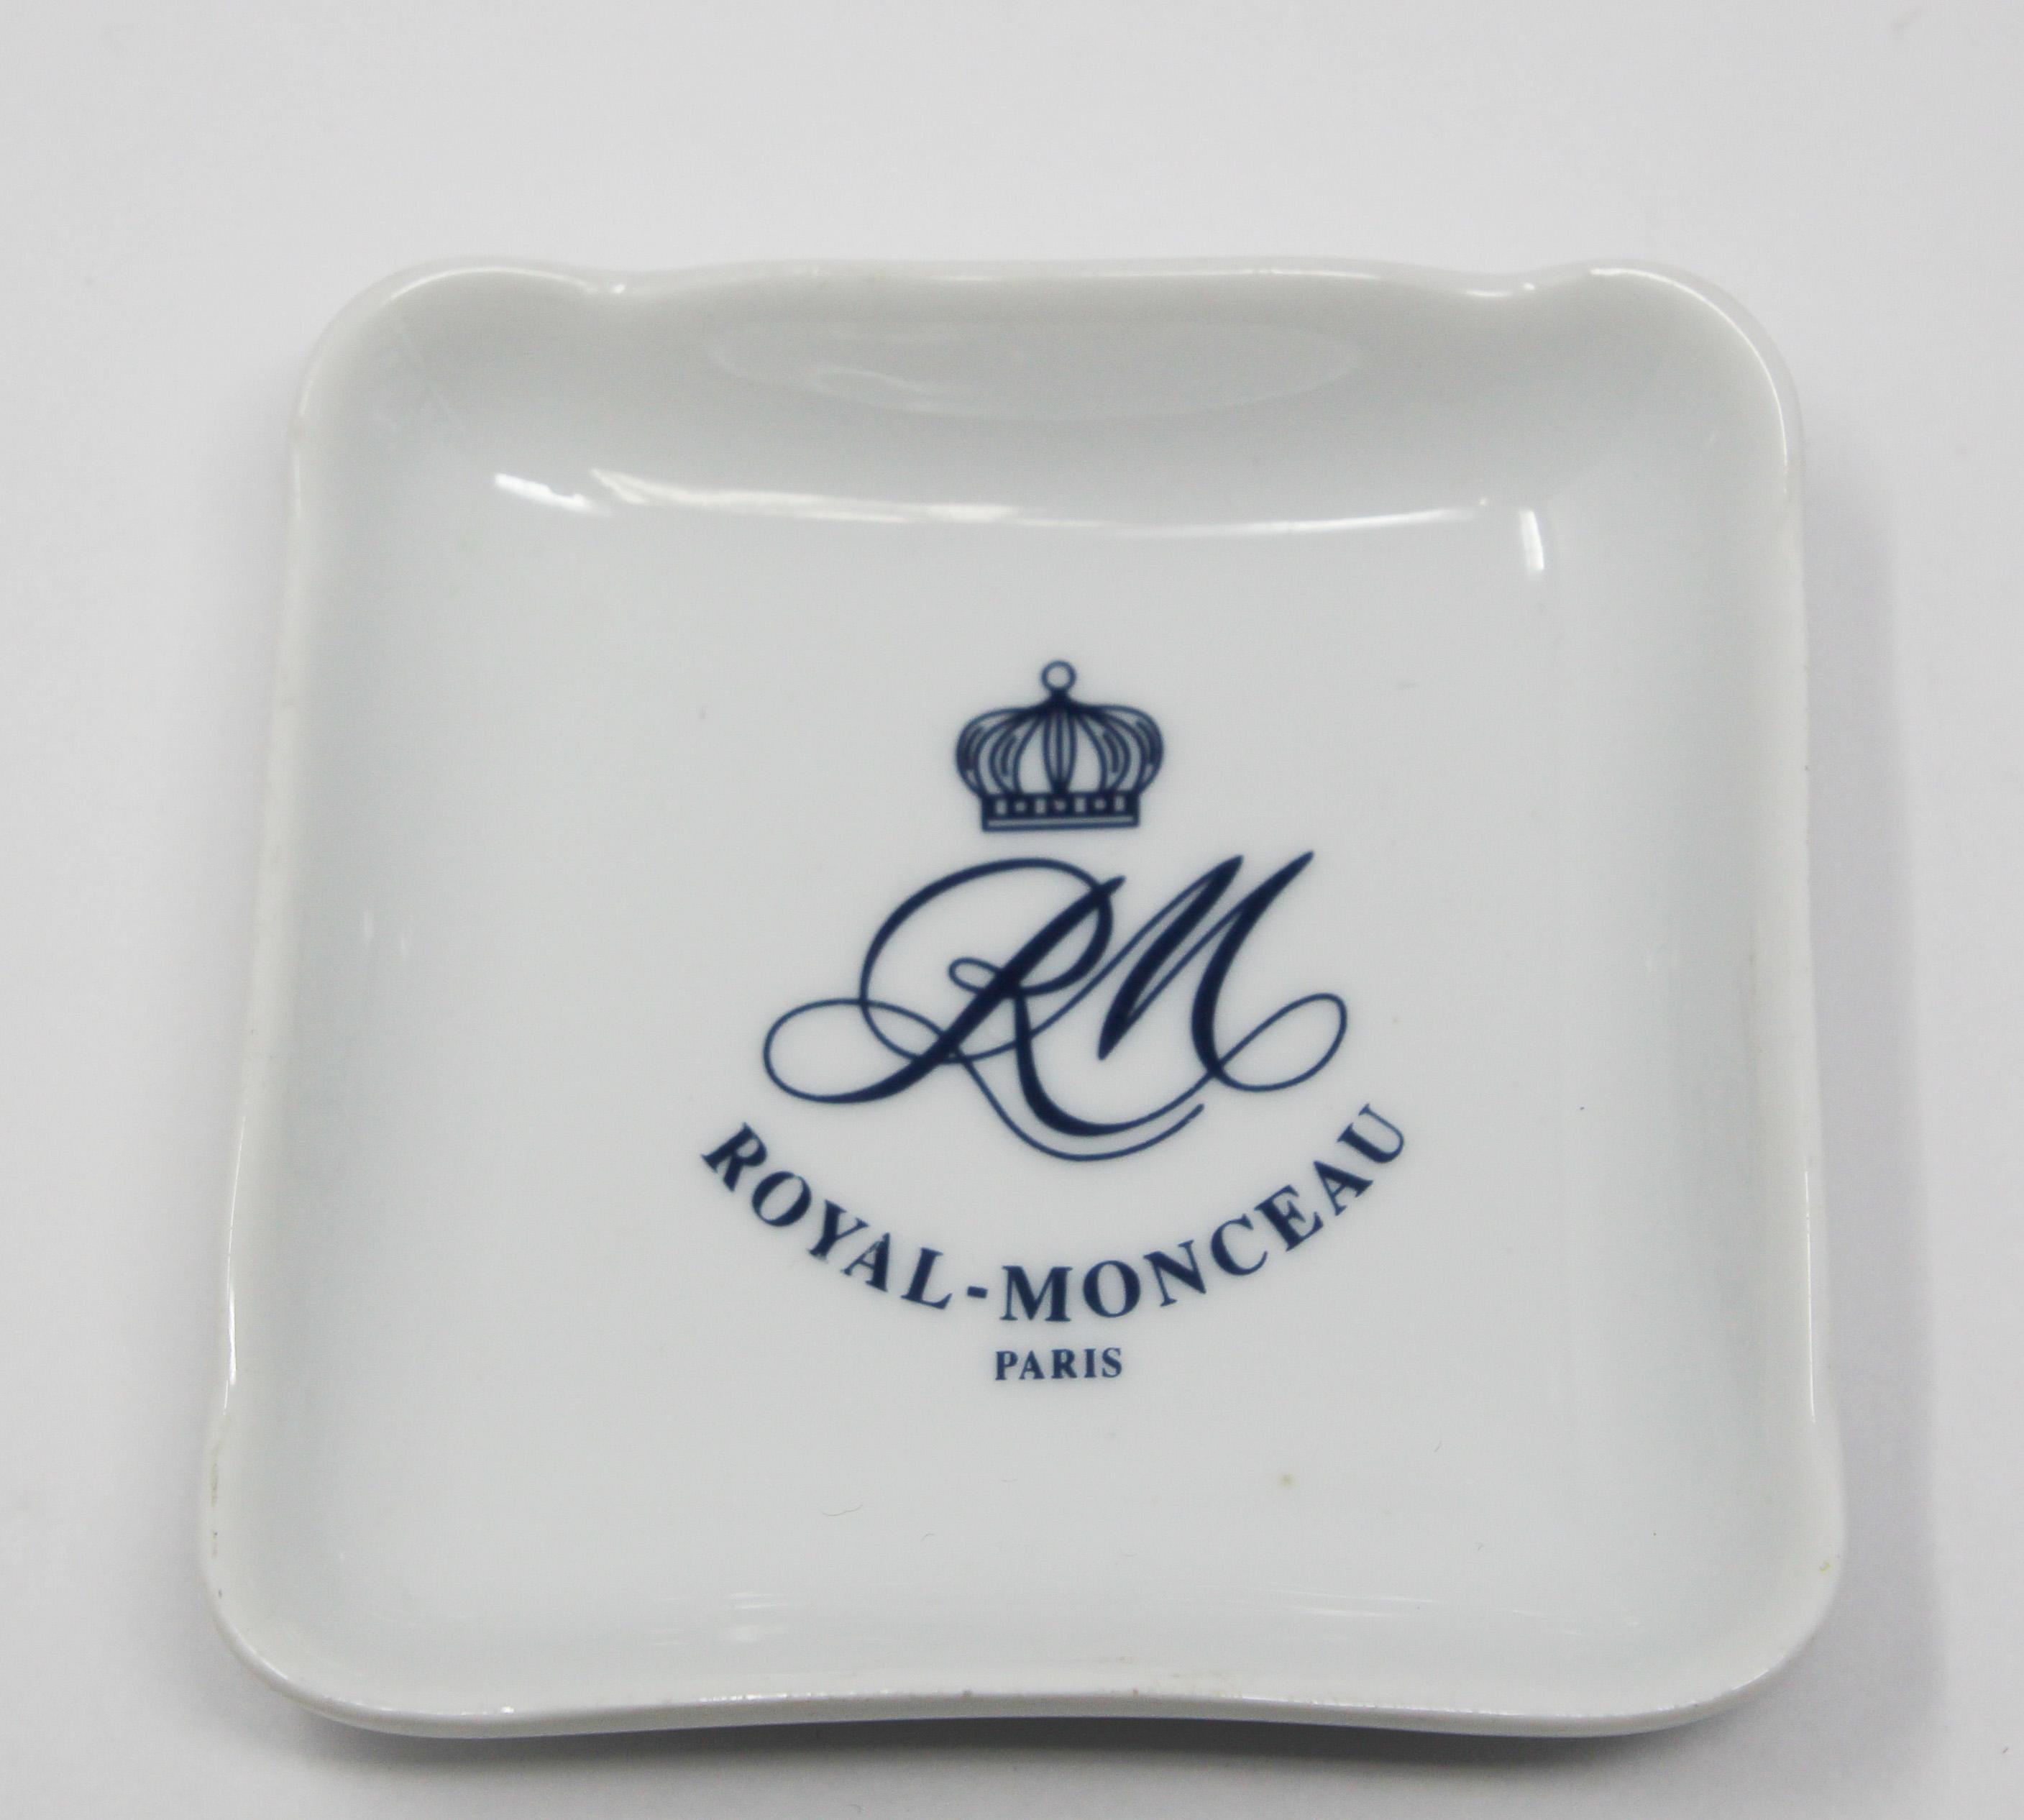 Set of two porcelain Royal Monceau ashtray.
Use it as an ashtray, vide poche or decorative collector item.
Vintage French ceramic catchall dishes from the 